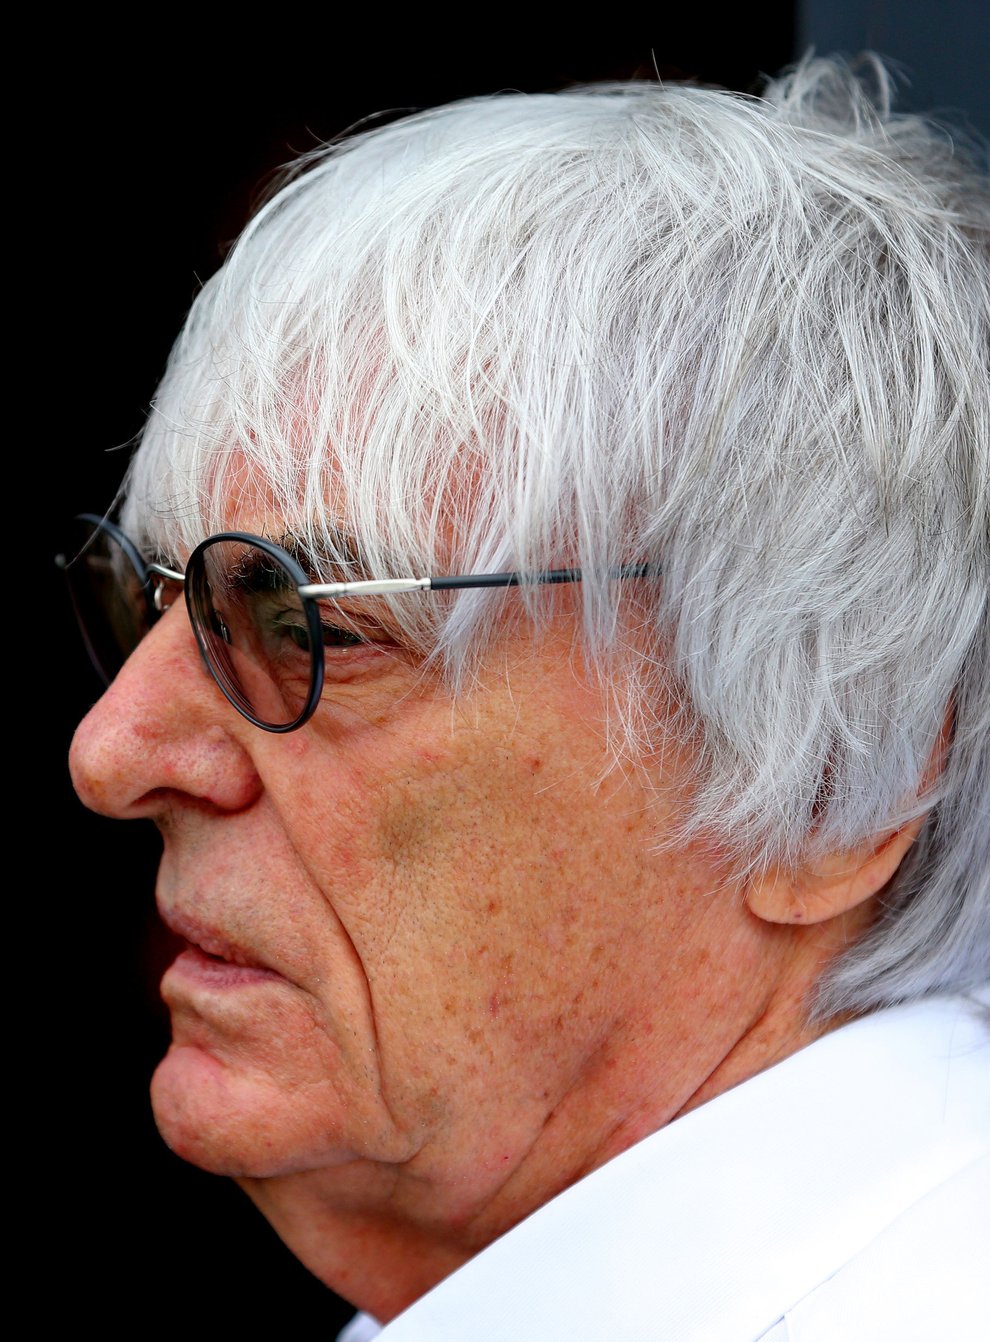 Bernie Ecclestone has been blasted for comments about racism in F1 